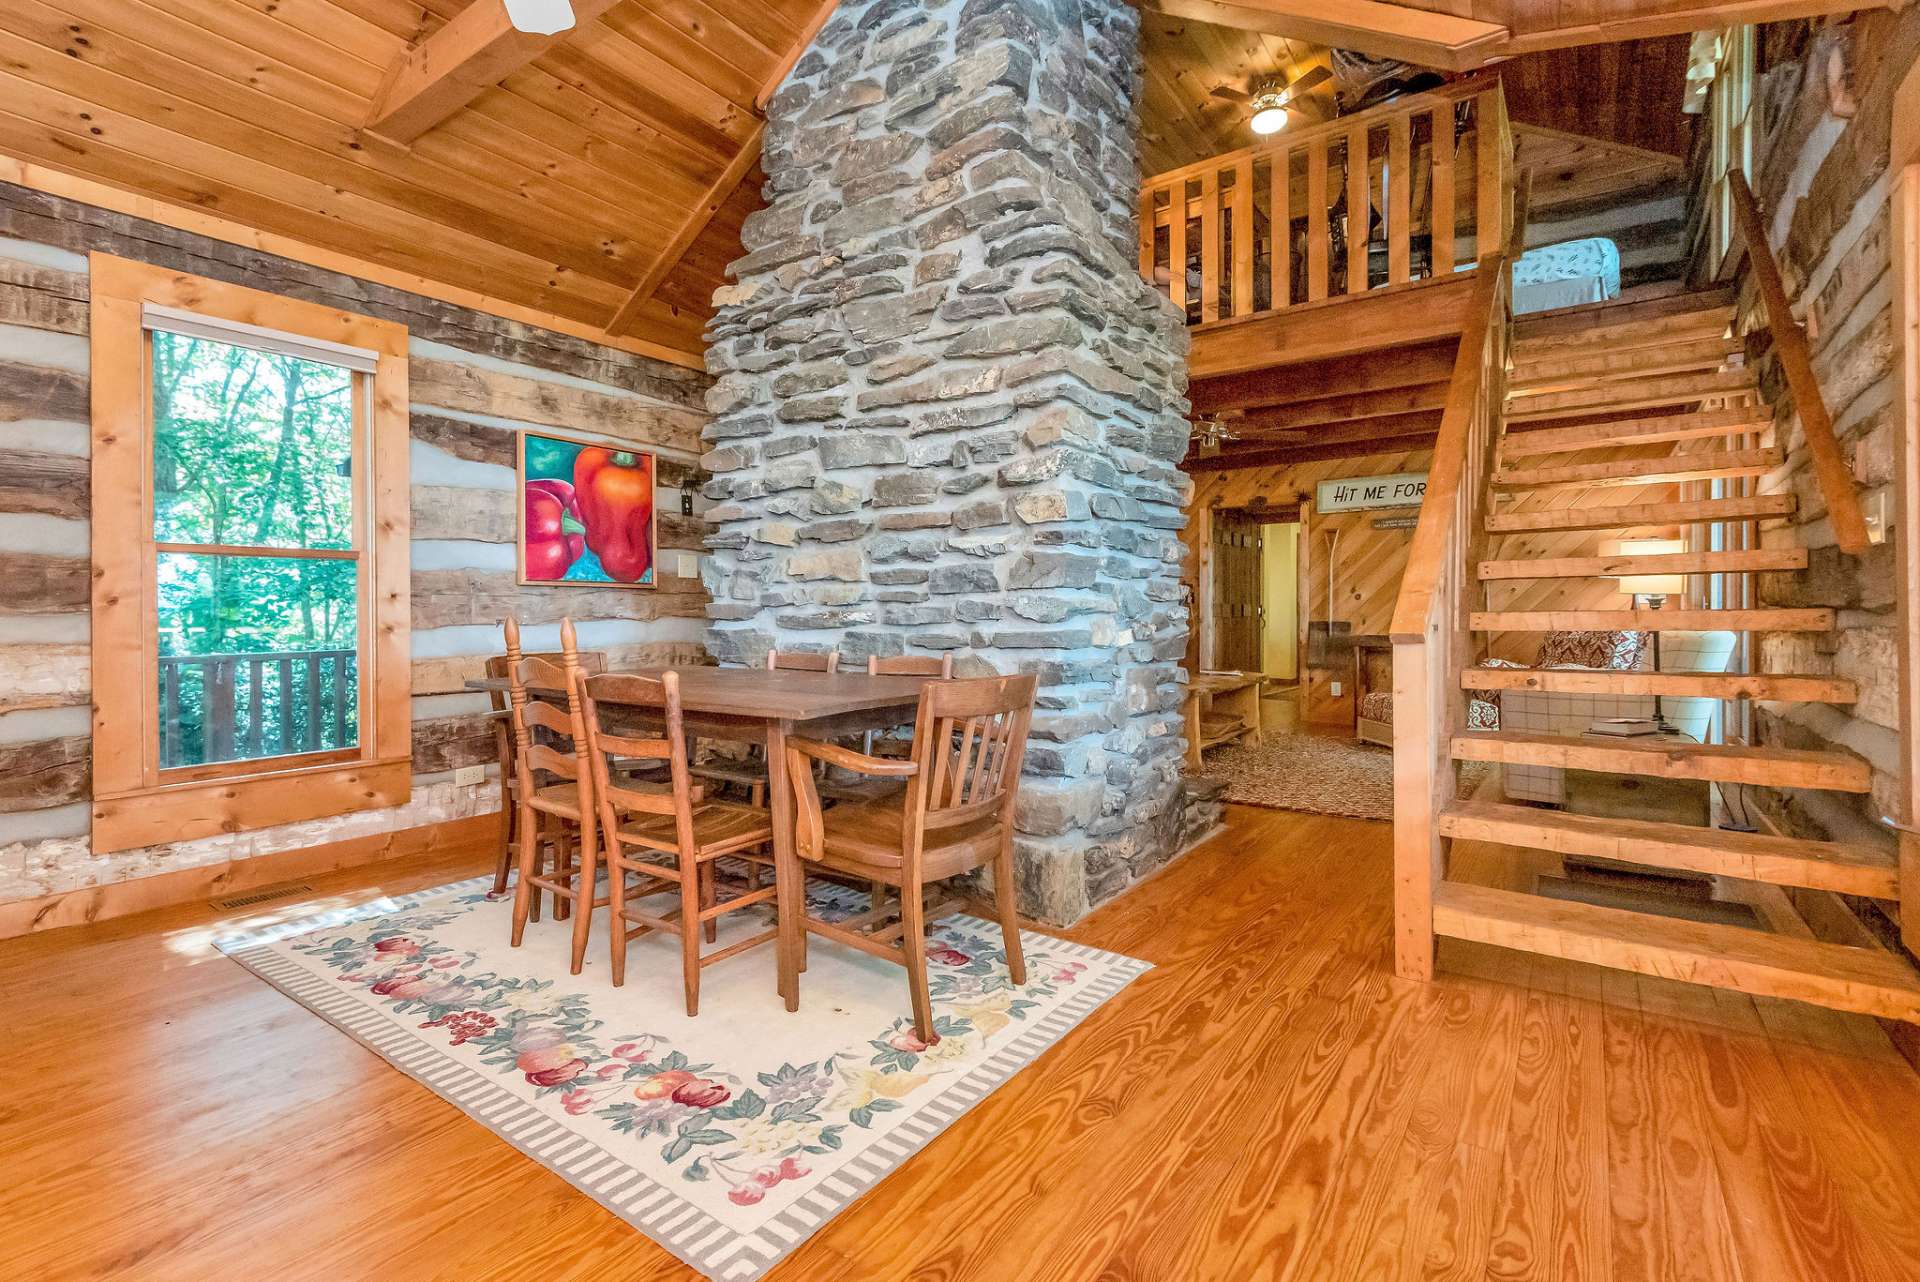 Hand-hewn stairway is a Stonebridge feature, along with a native stone fireplace.